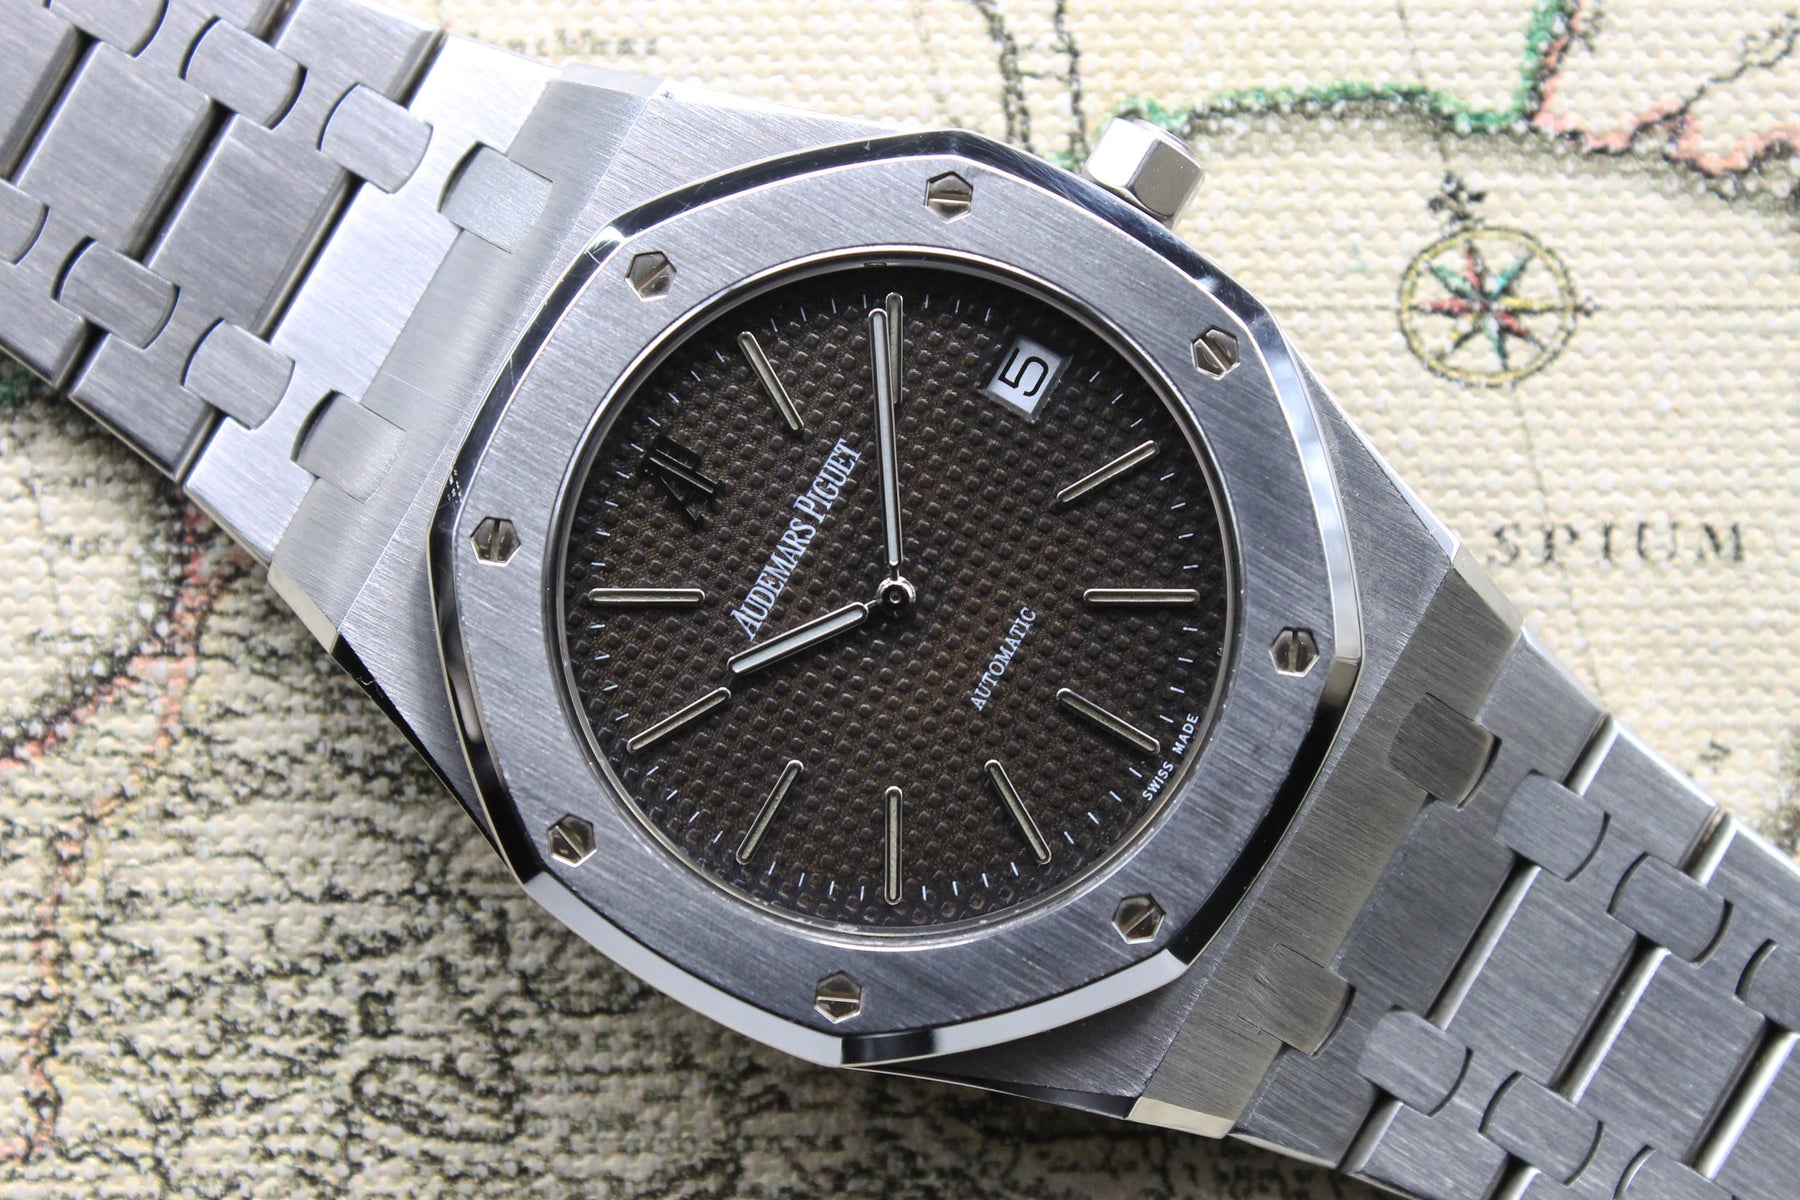 1995 Audemars Piguet Royal Oak Jubilee Tropical 39mm Ref. 14802ST (with Box & Extract from Archive 2020)